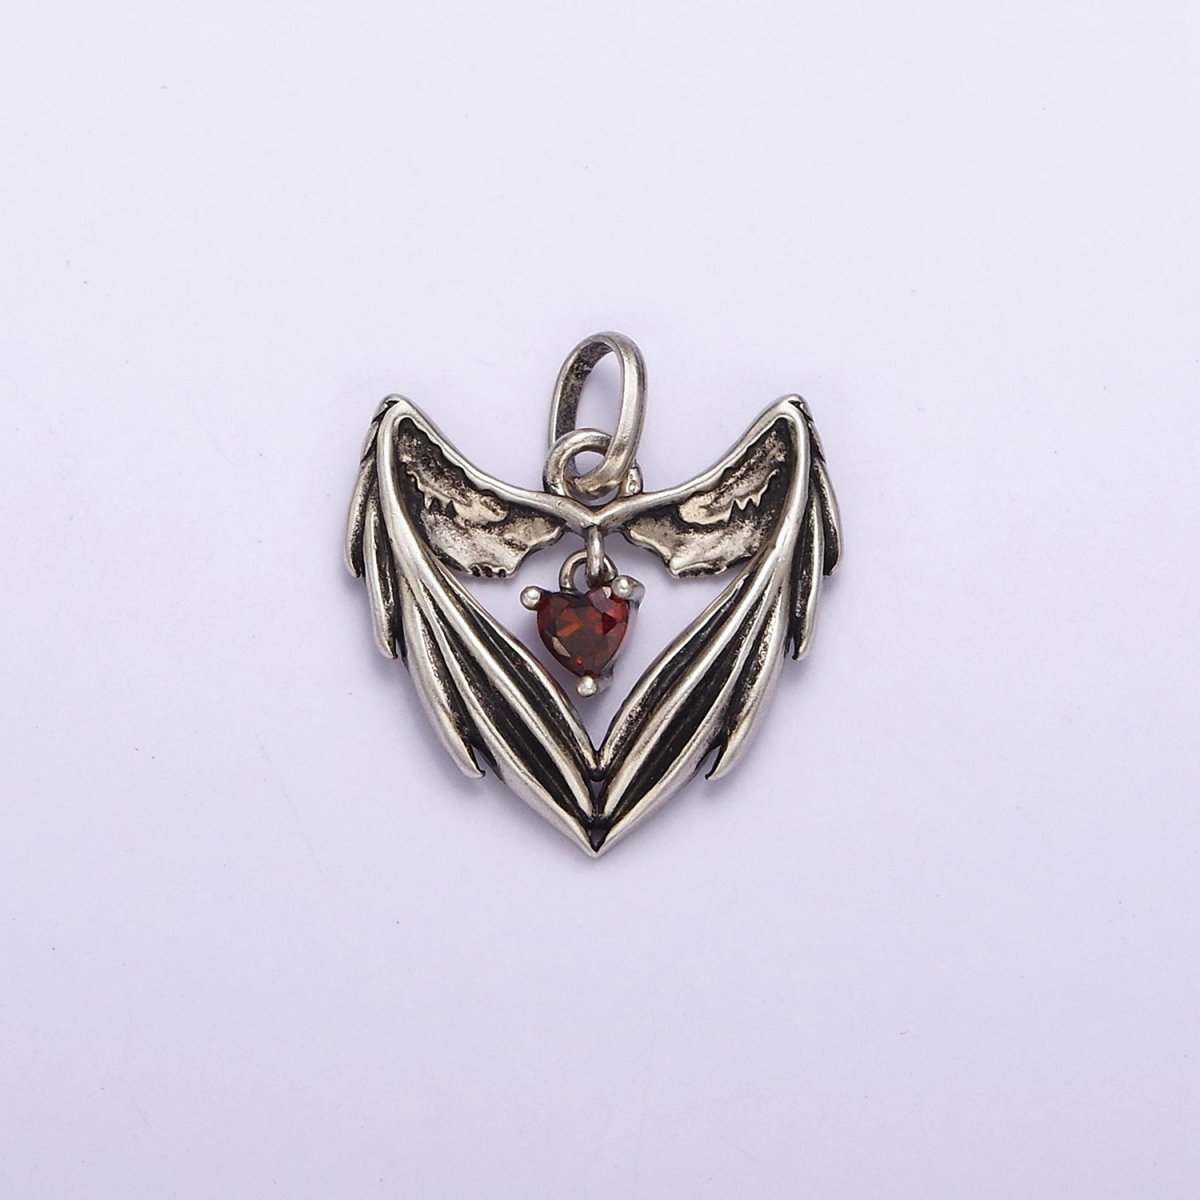 Dainty Angel Wing Heart Charm in 925 Sterling Silver Pendant with Red Cz Jewelry SL-319 - DLUXCA